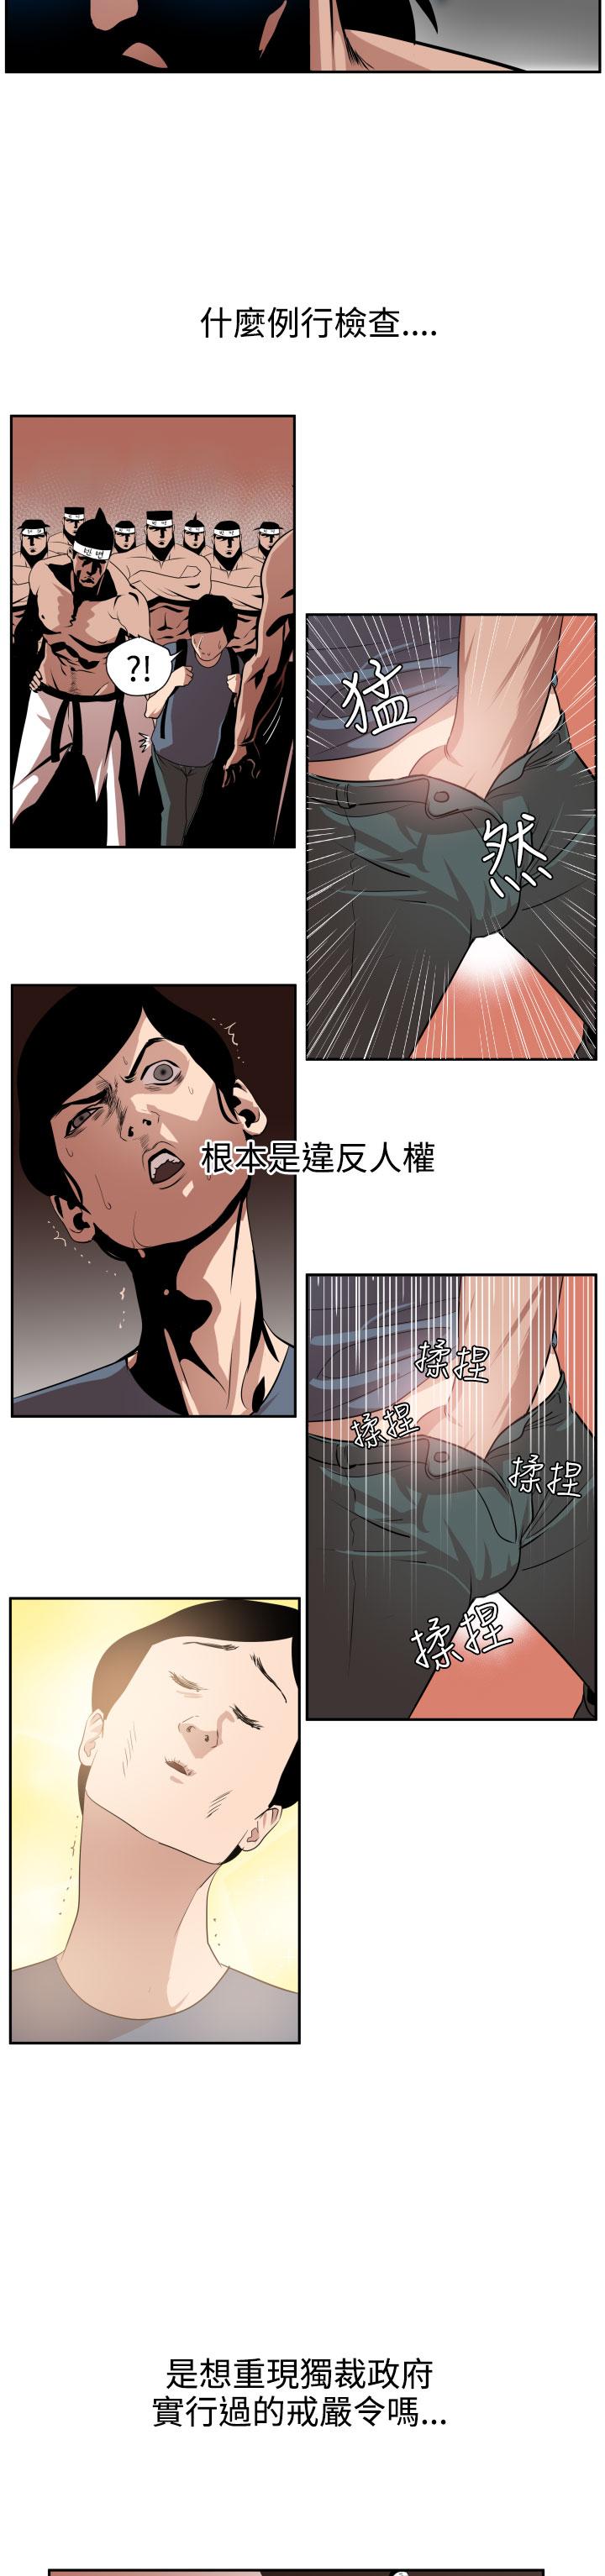 Desire King (慾求王) Ch.1-12 (chinese) 325